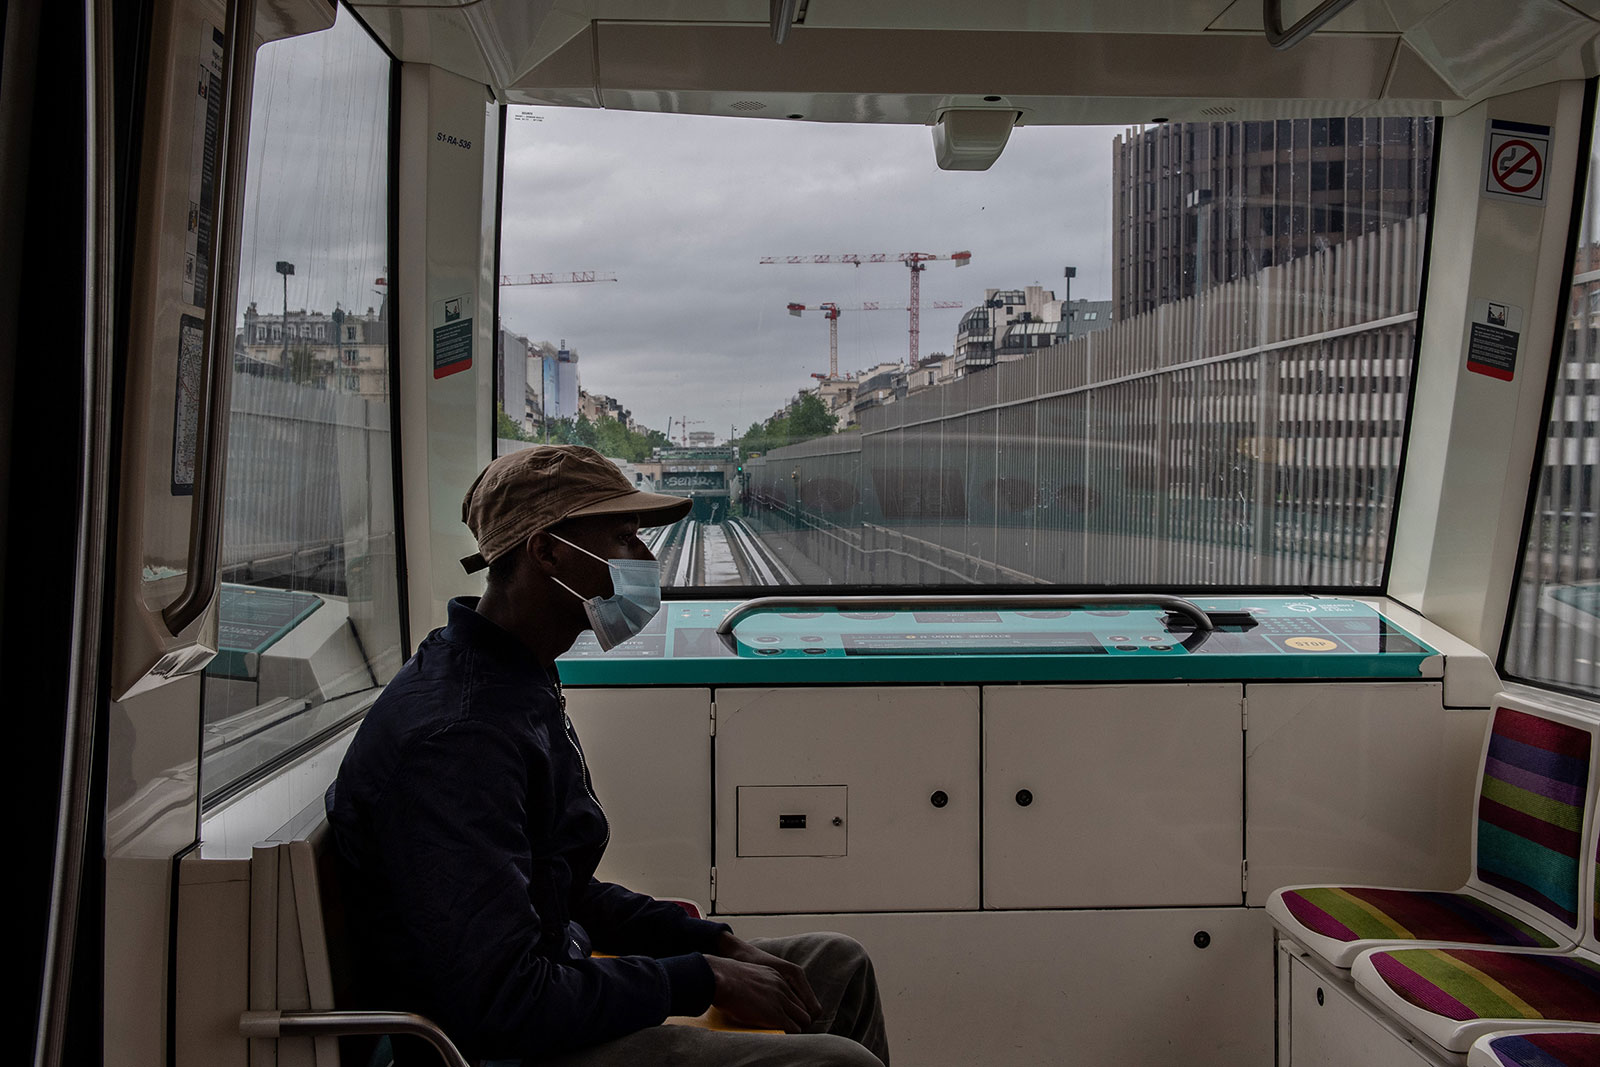 A commuter wearing a mask rides on the metro in Paris on May 11.